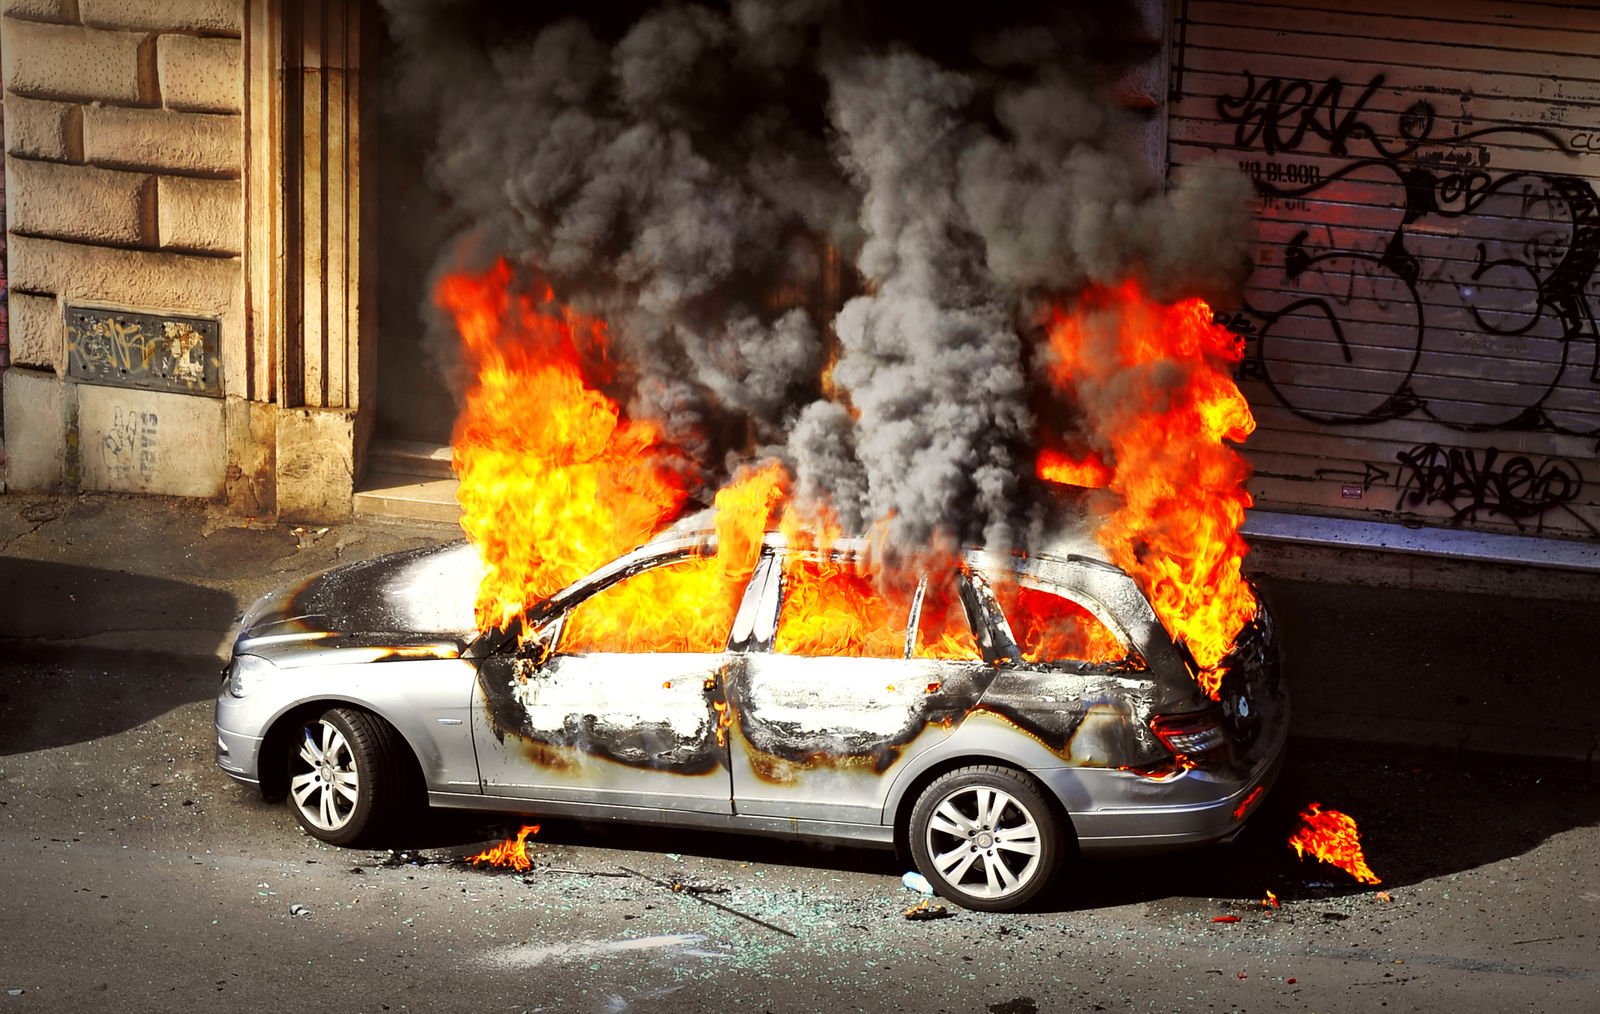 Does car insurance cover fire damage?